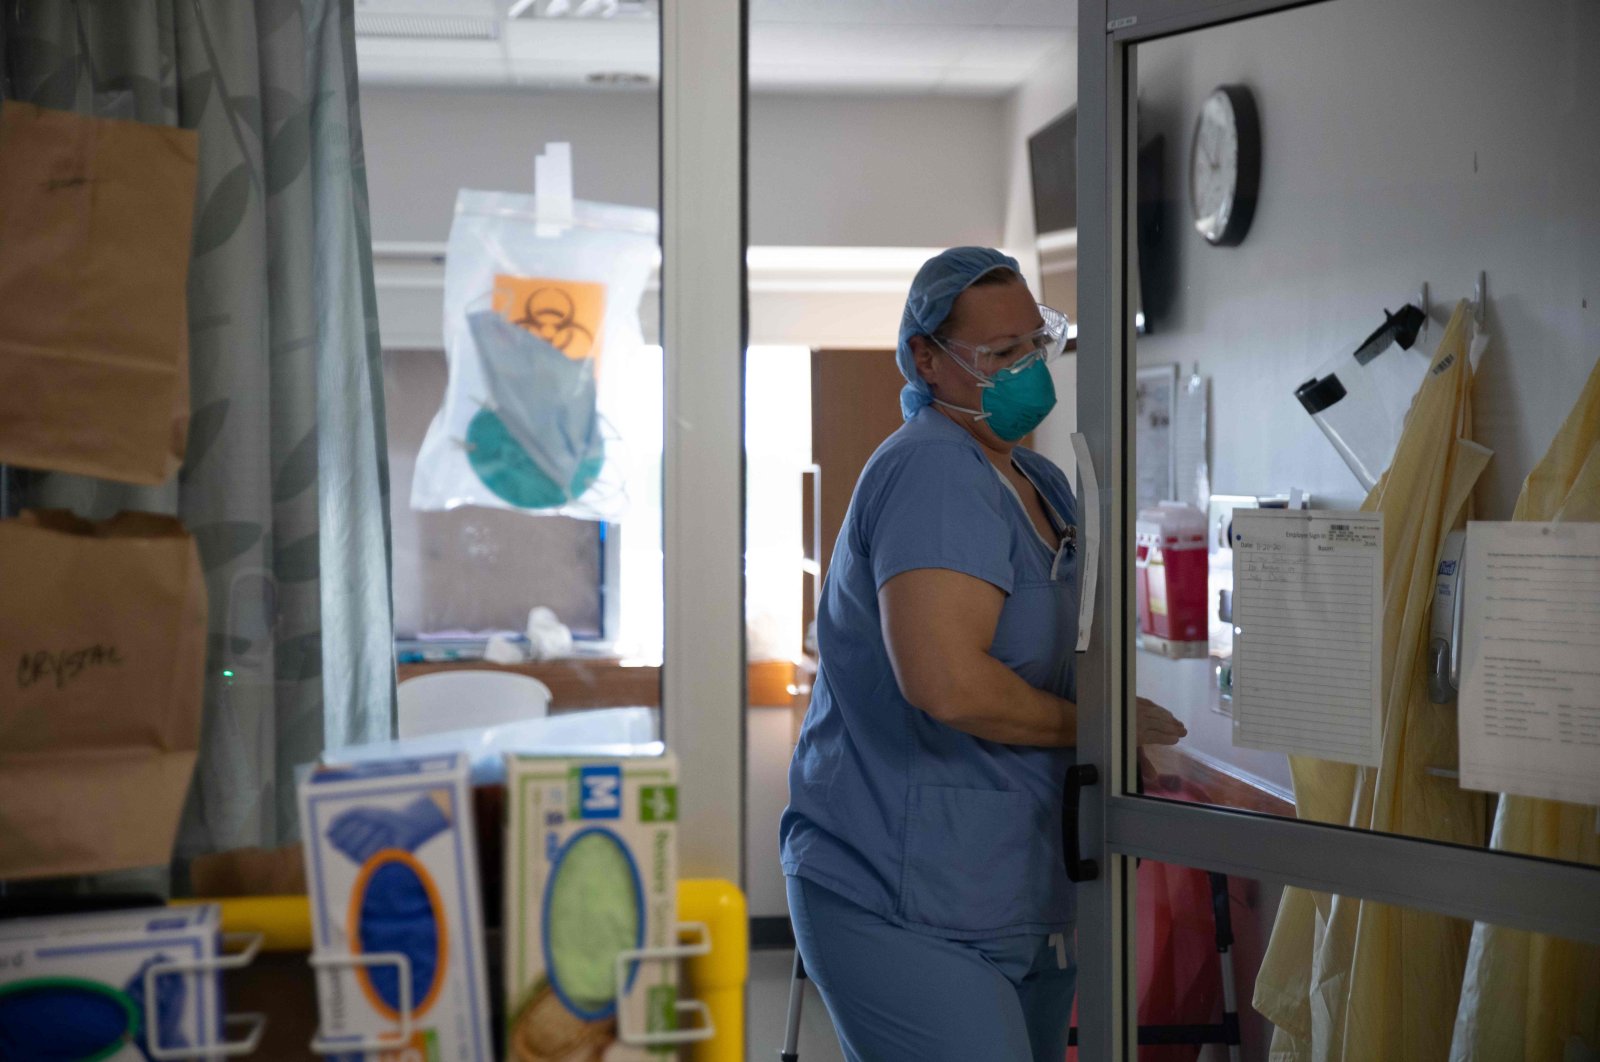 A healthcare professional exits a COVID-19 patient's room in the ICU at Van Wert County Hospital in Van Wert, Ohio, Nov. 20, 2020. (AFP Photo)